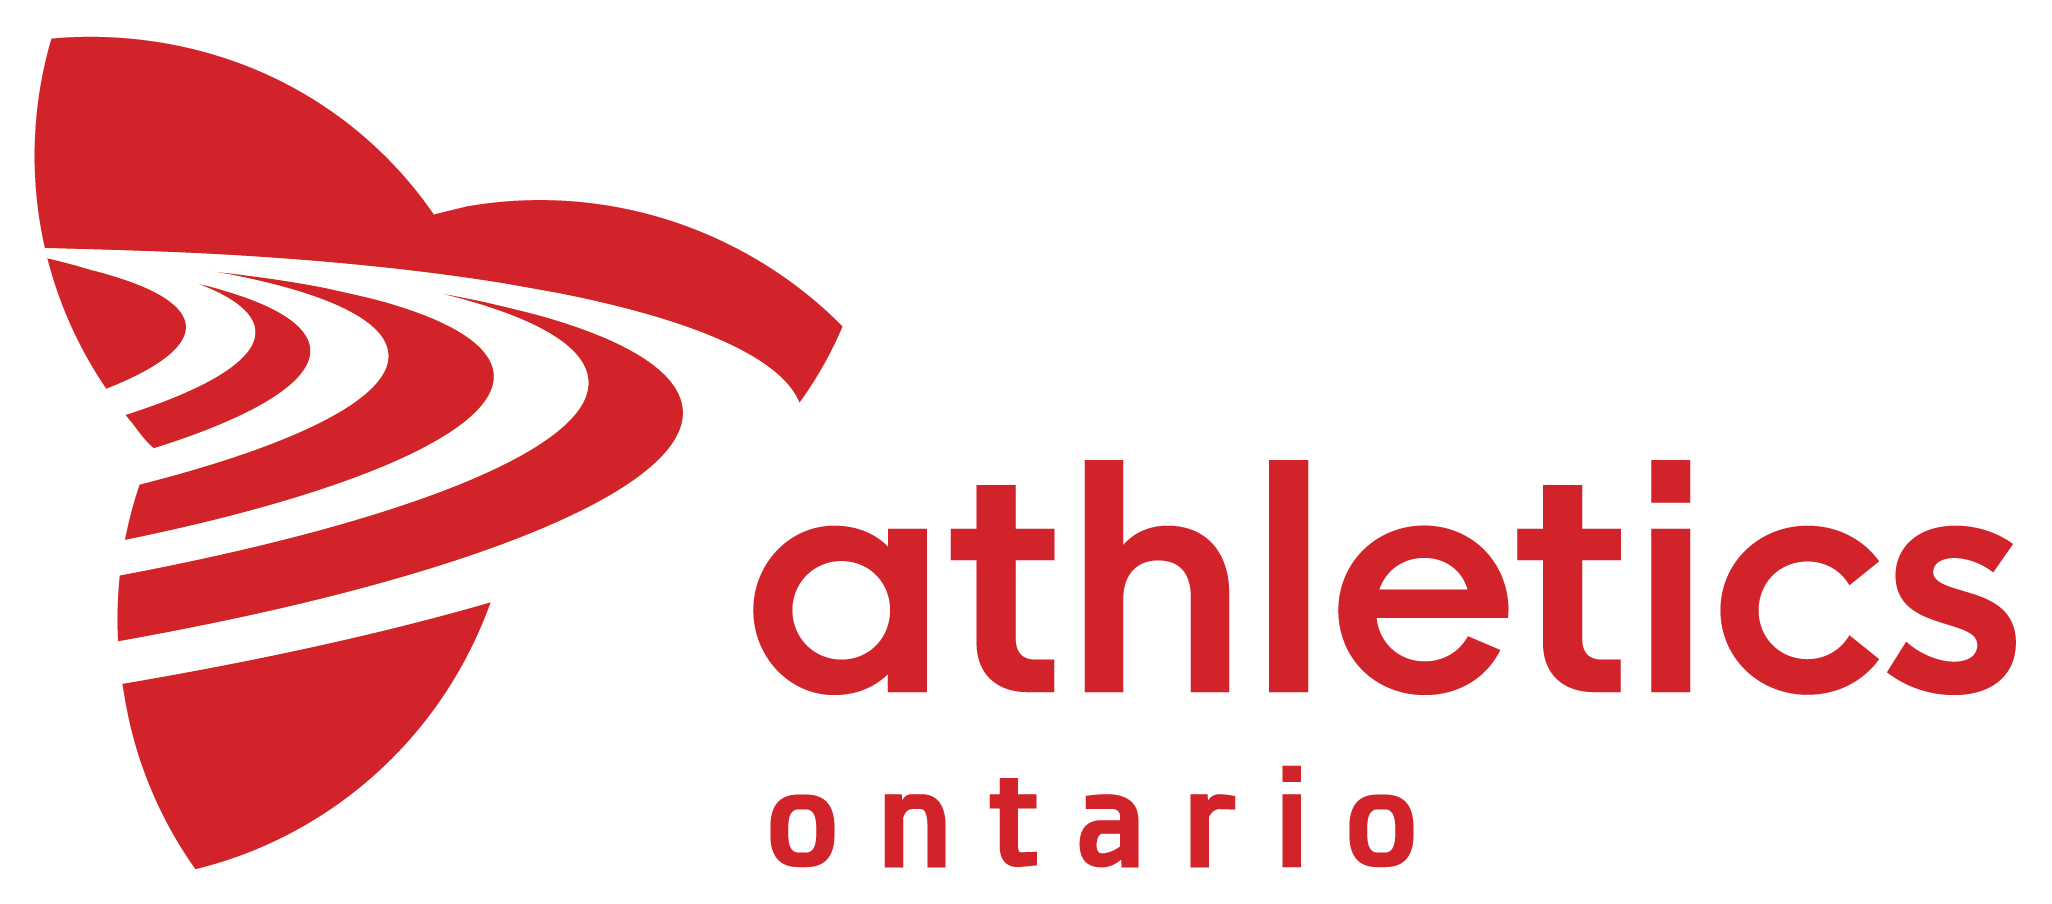 Ontario Officials Annual General Meeting & National Clinics